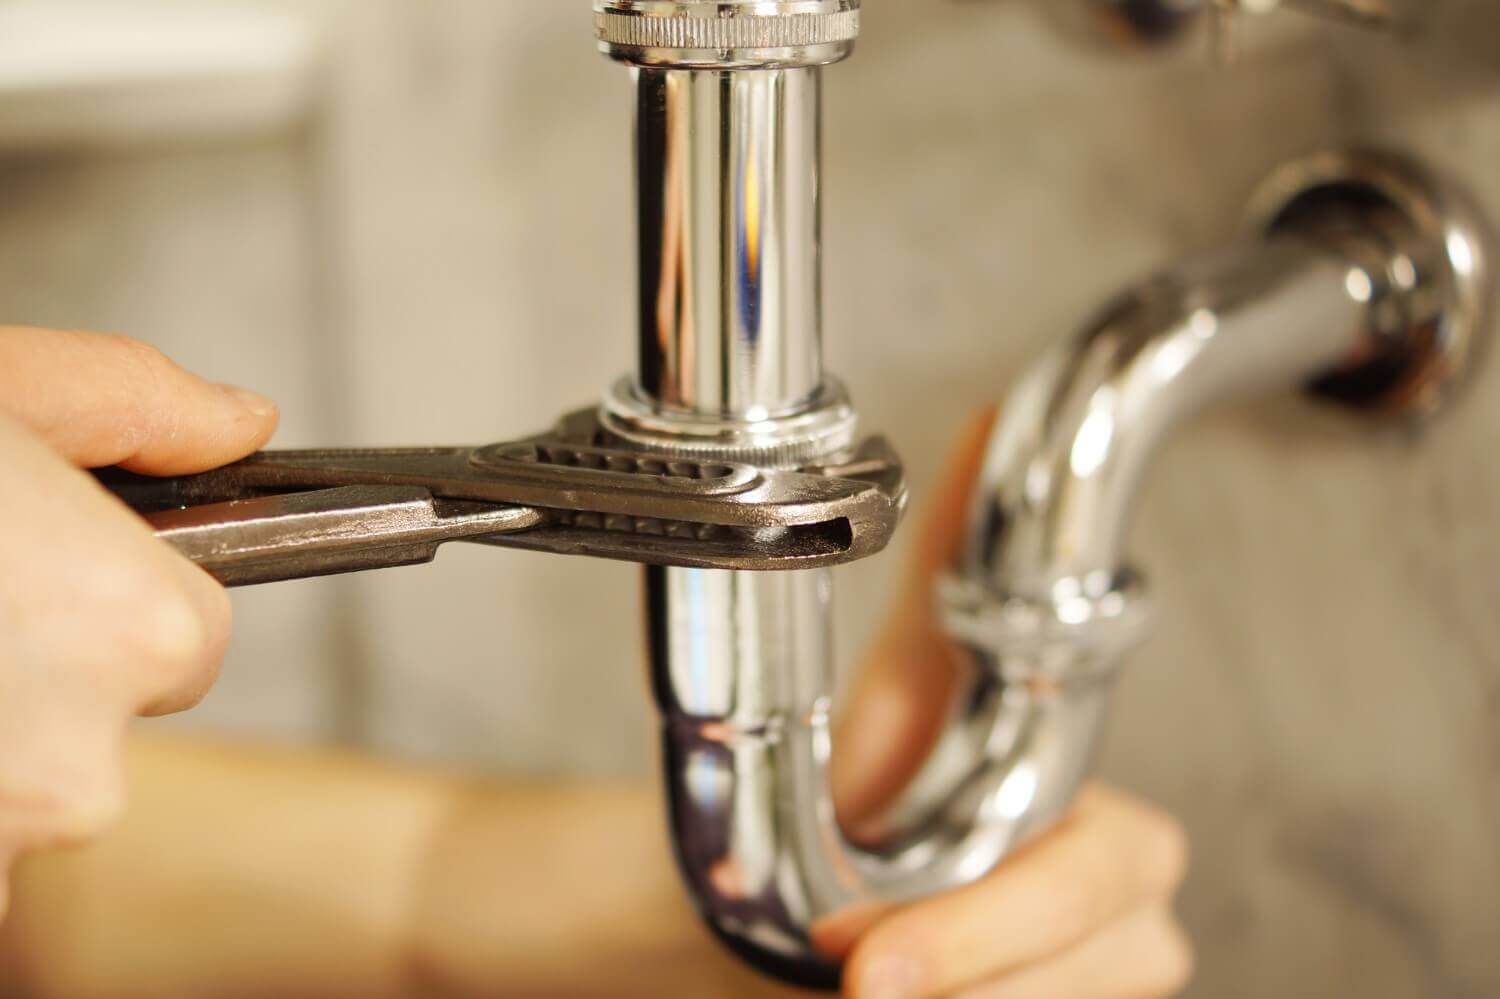 The Ultimate Guide of How to Start a Plumbing Business in 12 Steps